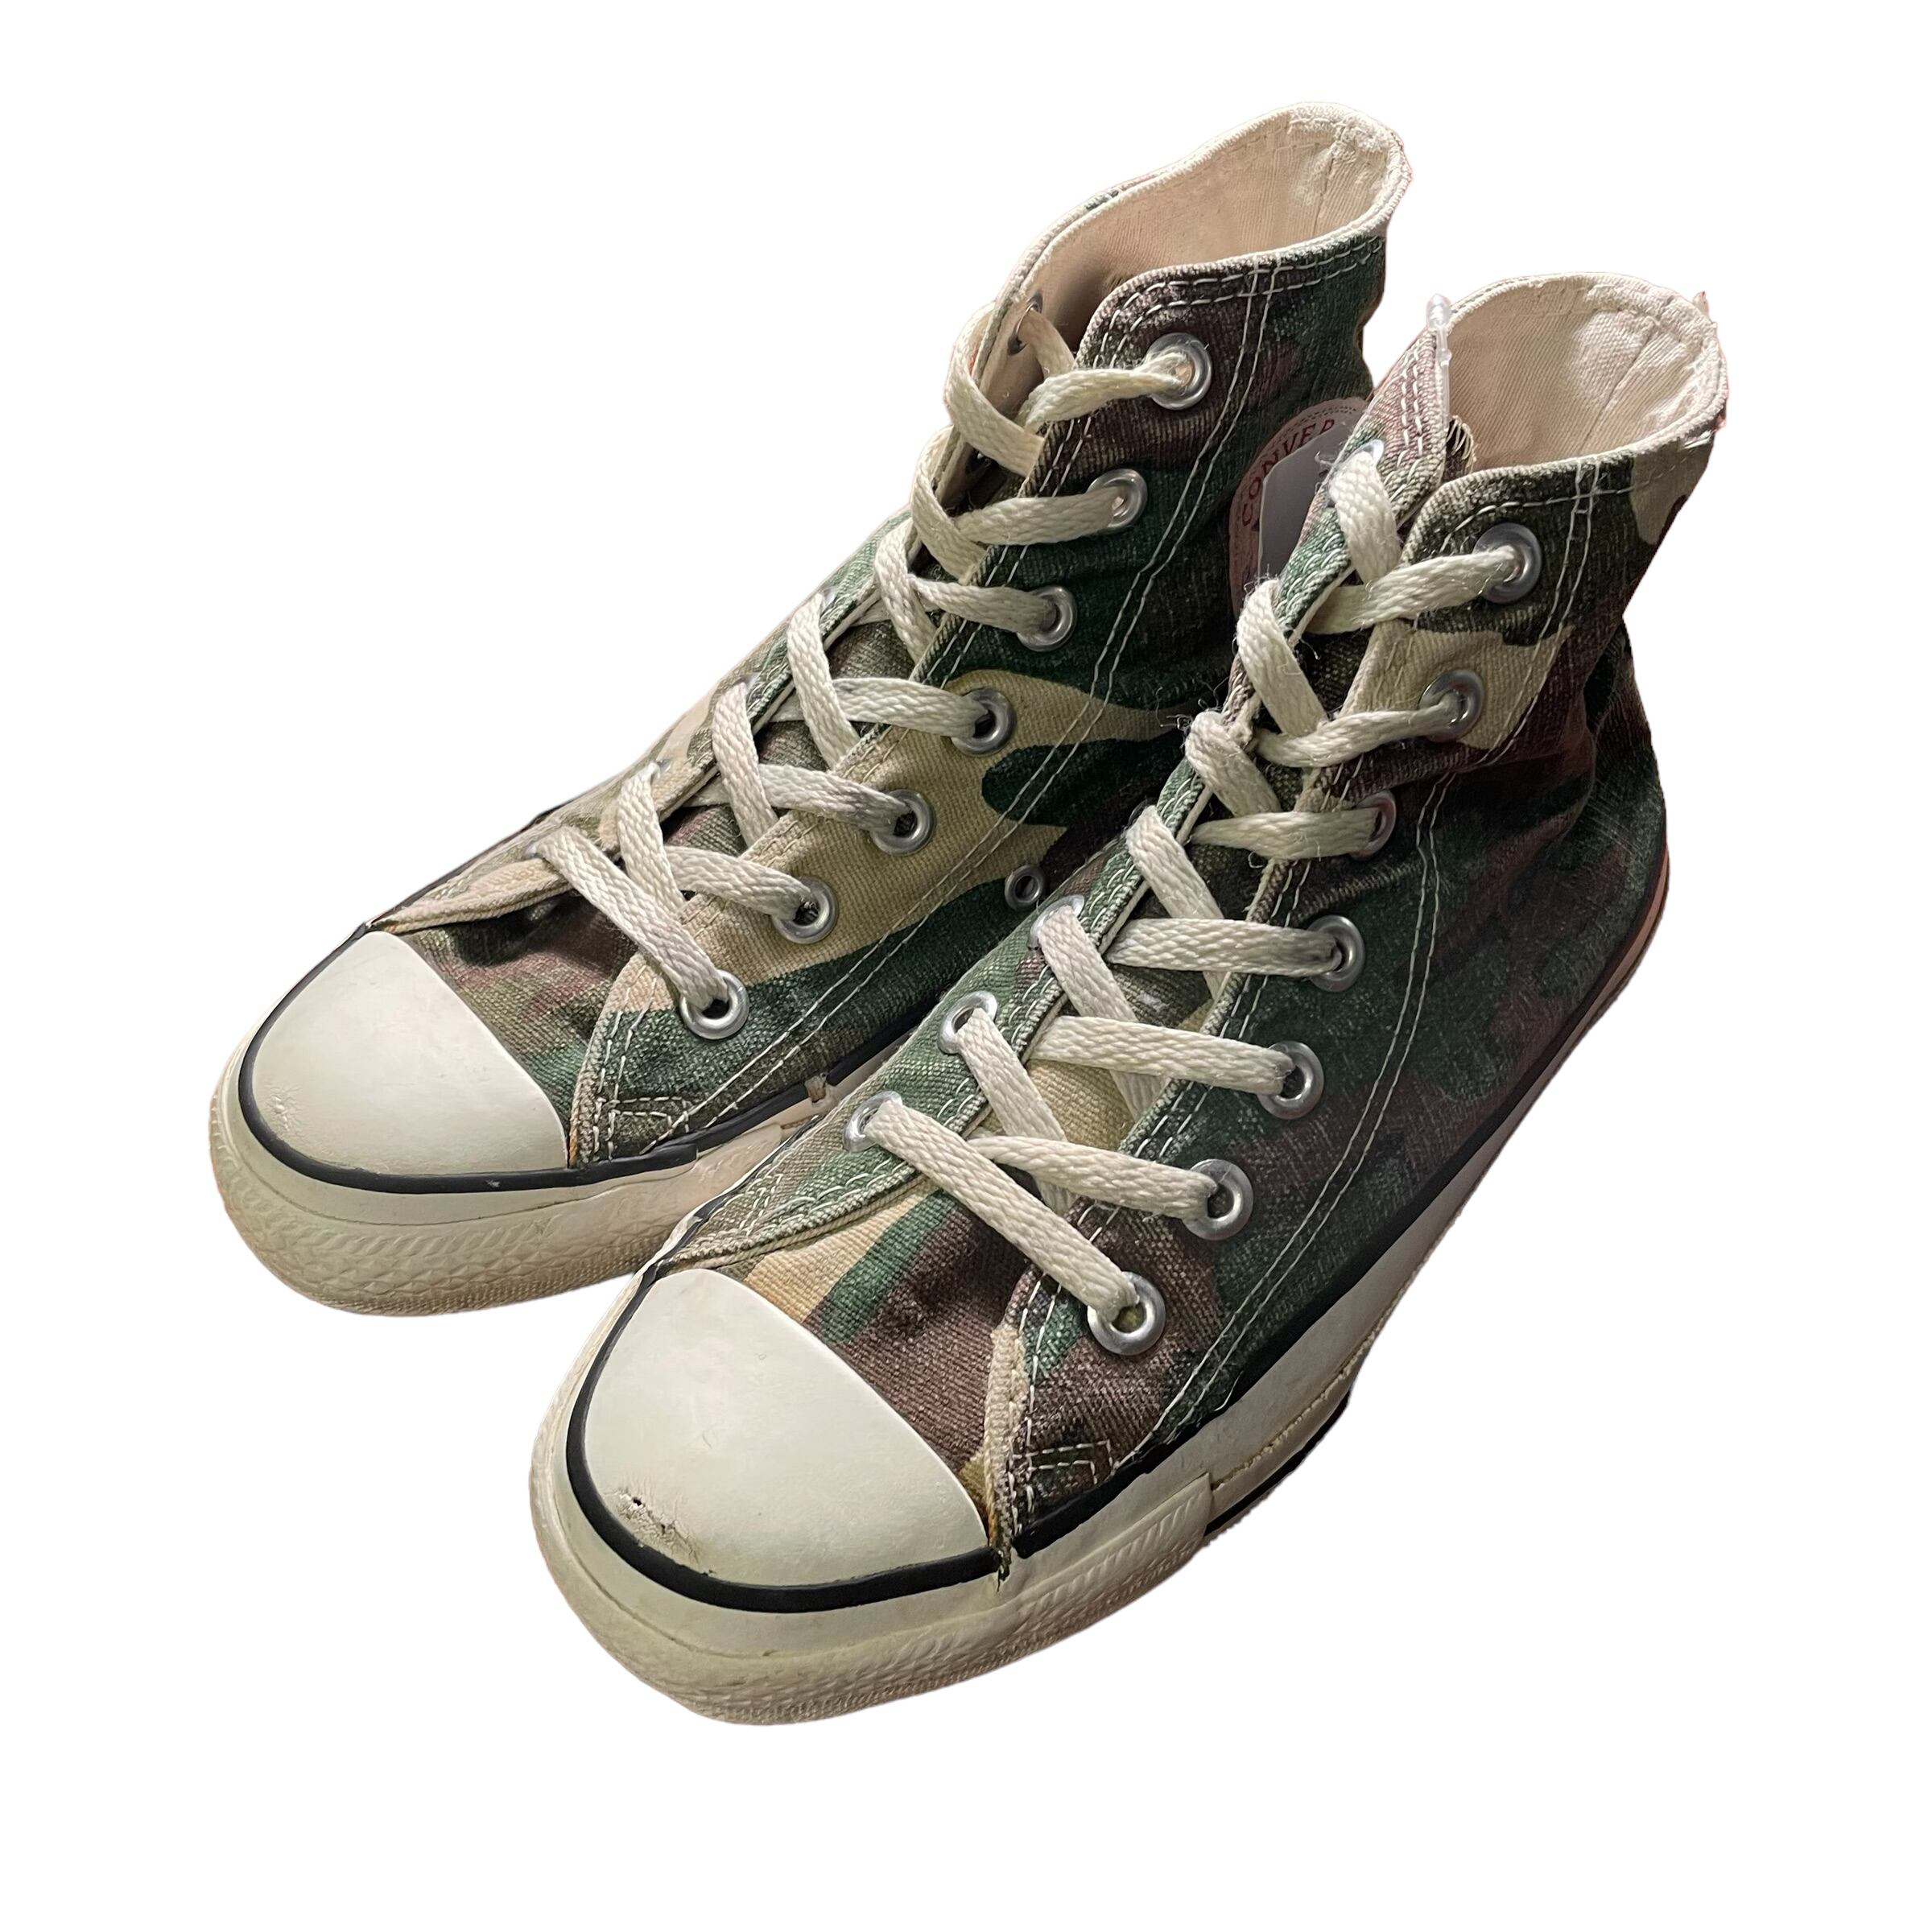 90's CONVERSE ALLSTAR Hi wood land came made in USA【US4.5】0003